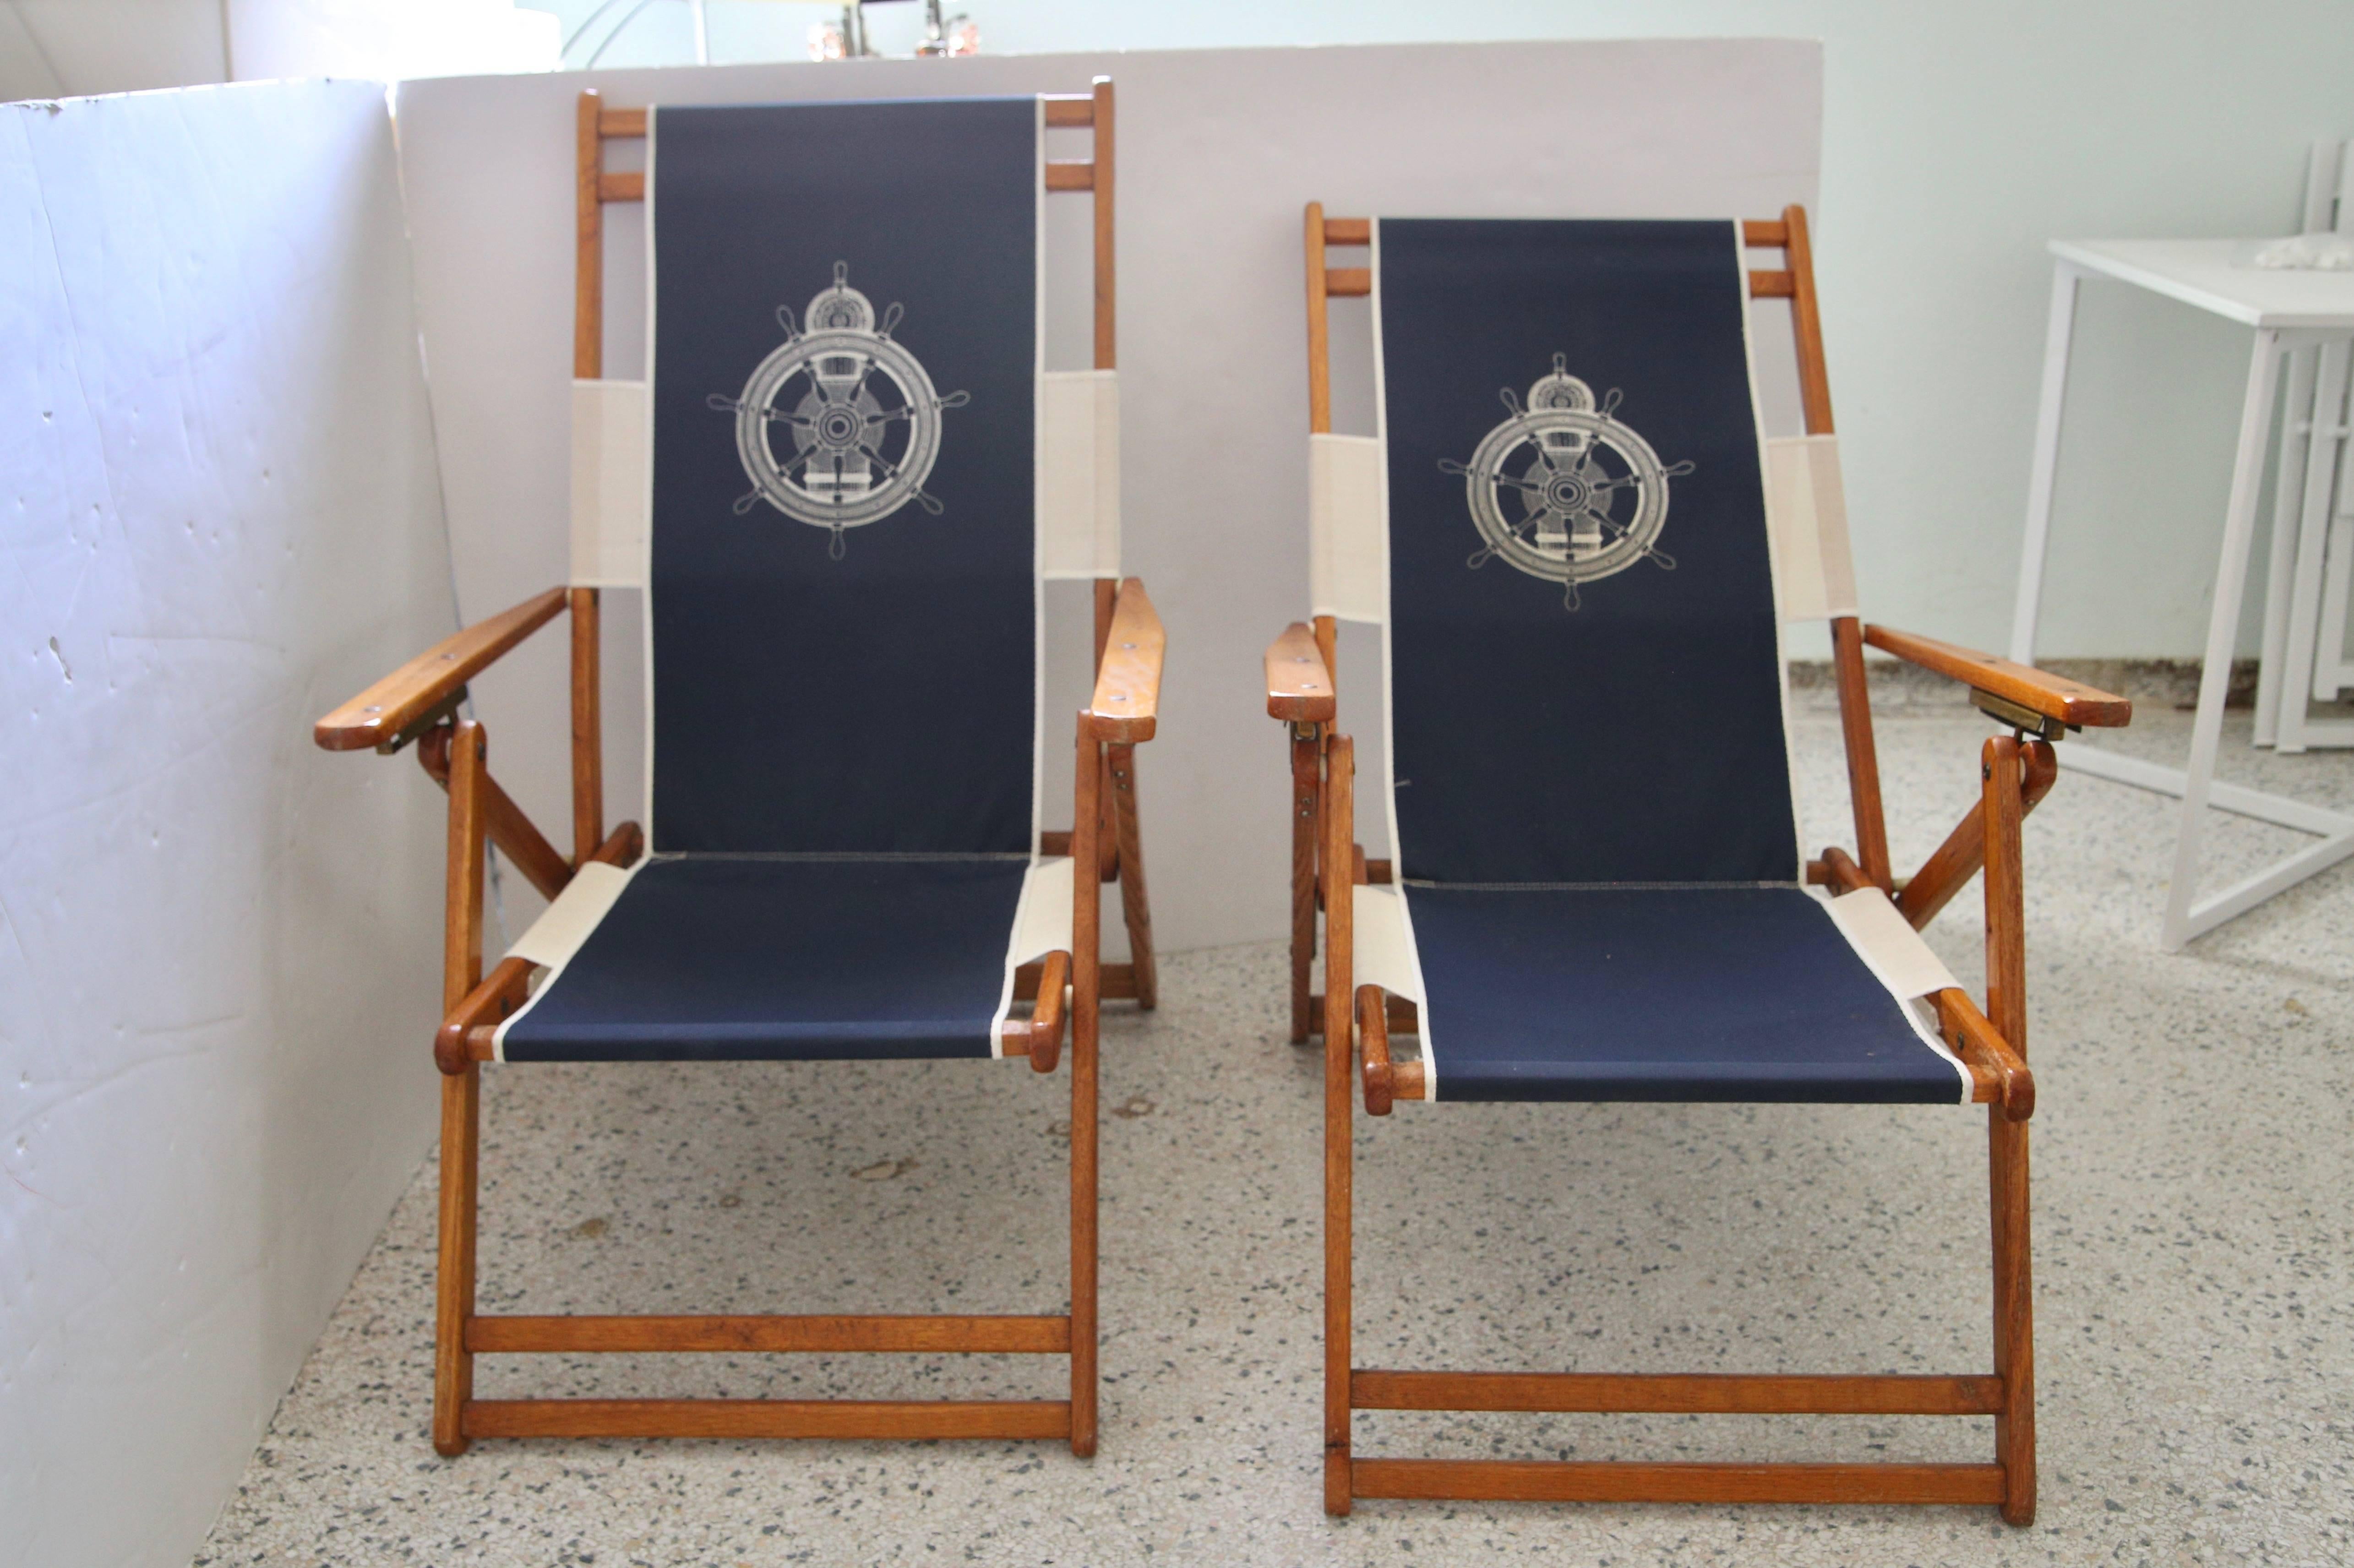 This pair of deck chairs will make the perfect perch for your sunny afternoon along side you swimming pool or perhaps lakeside this summer.

Note: Dimensions (with leg-rest section attached) if back of chair is upright are 39